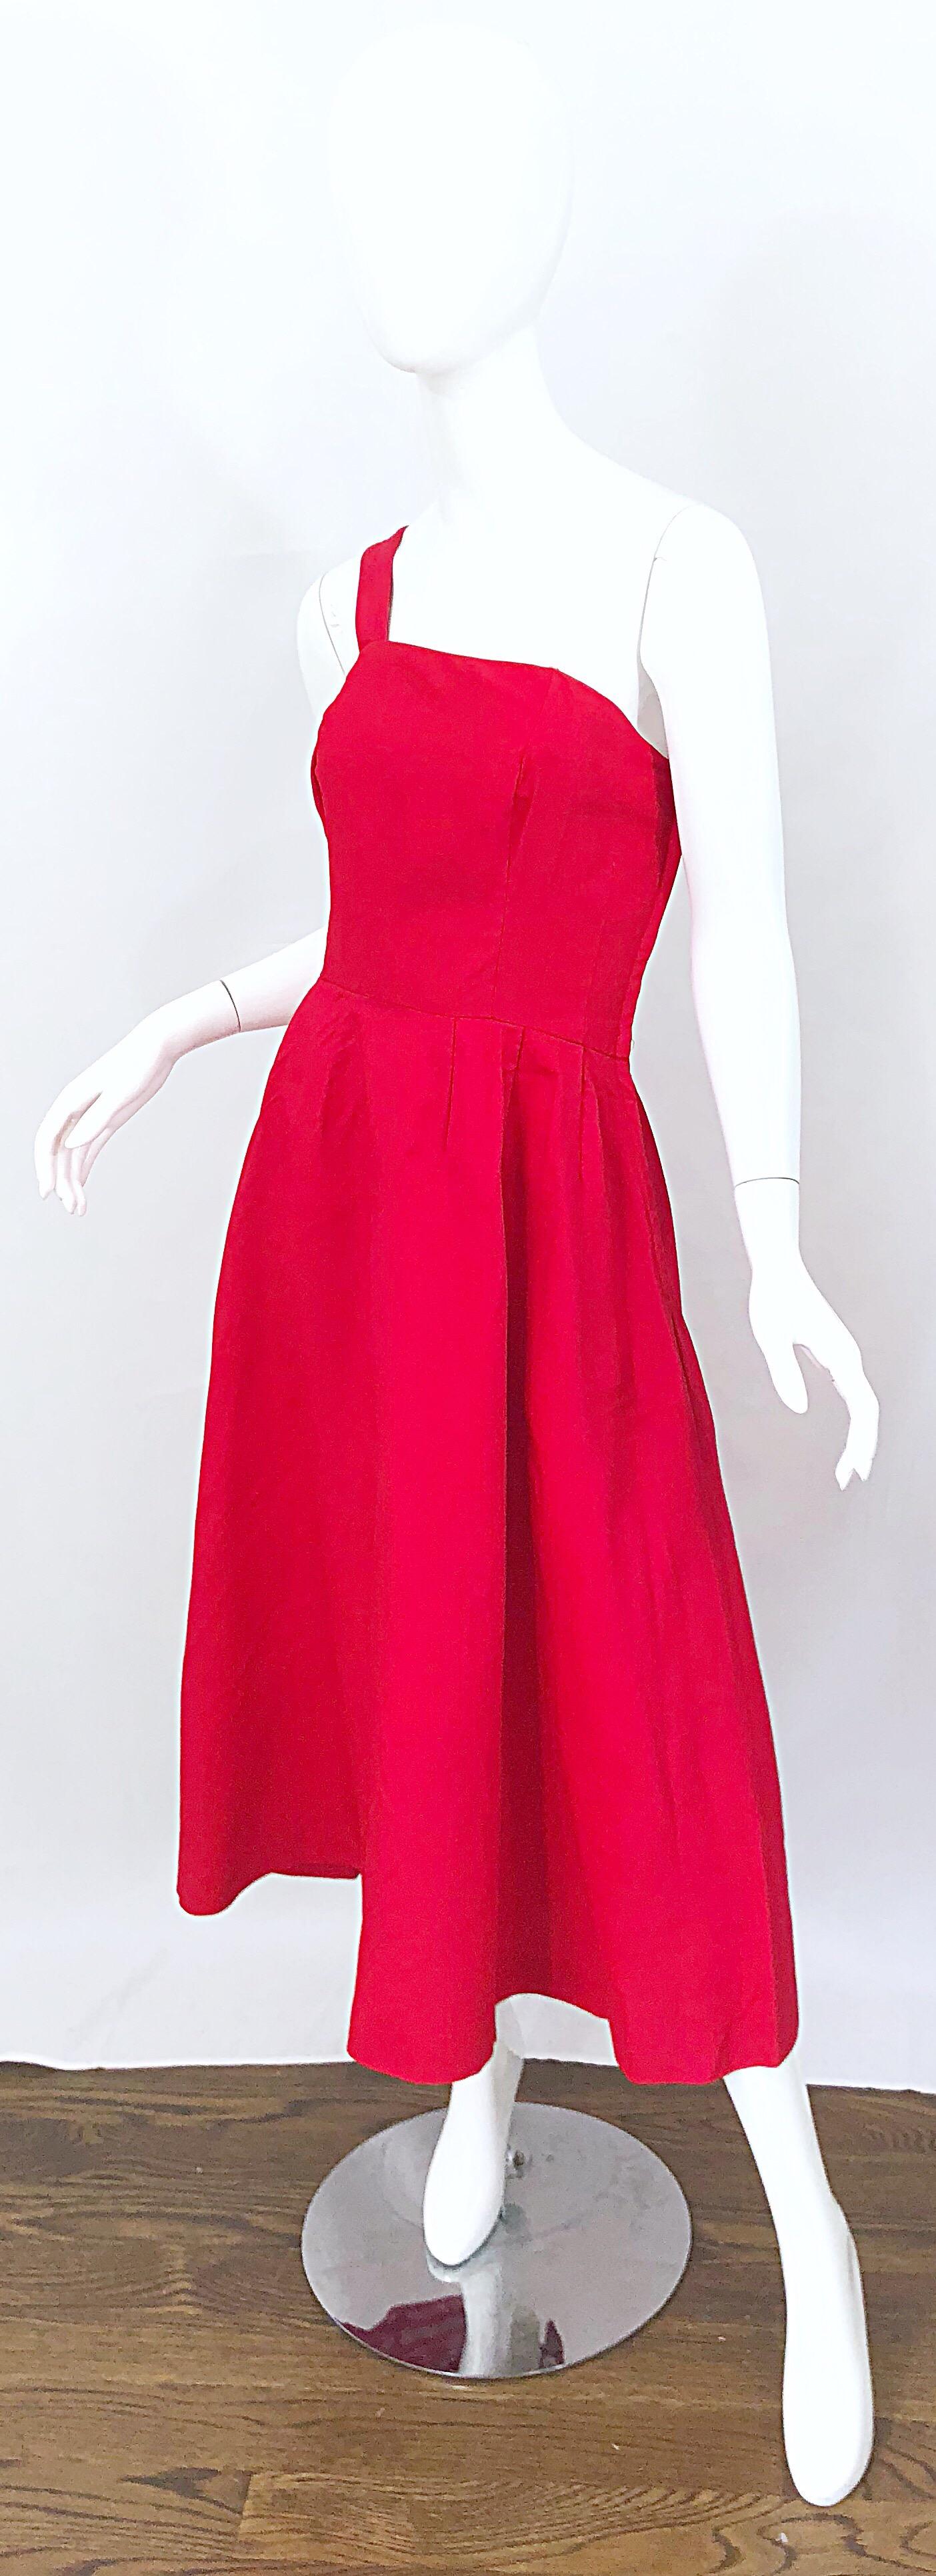 1950s Bess Myerson Lipstick Red + White One Shoulder Vintage 50s Silk Dress In Excellent Condition For Sale In San Diego, CA